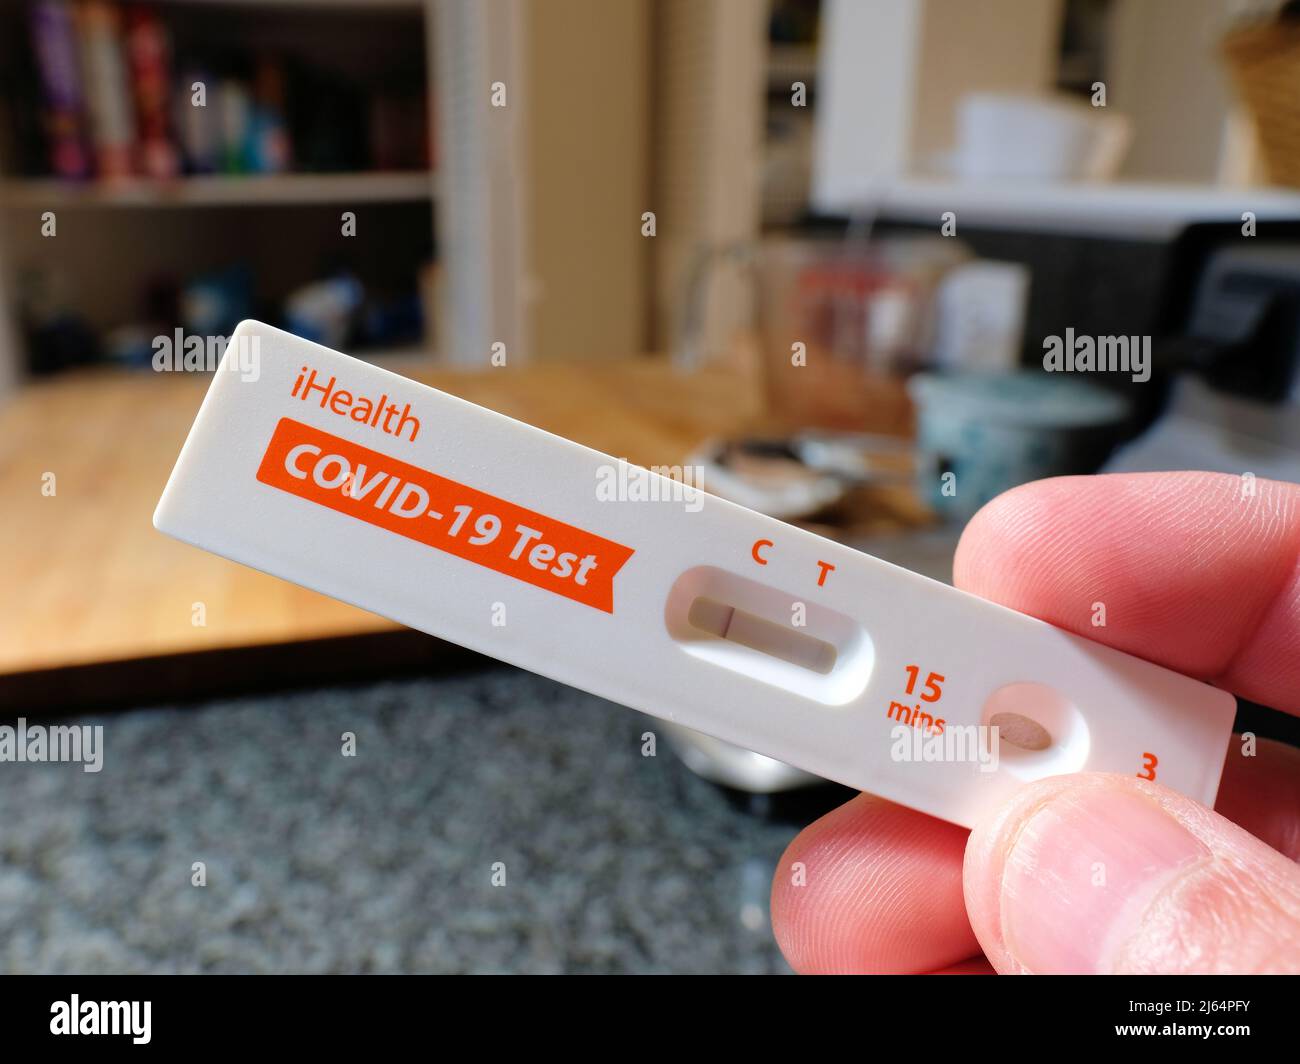 Person's hand holding an iHealth COVID-19 Antigen Rapid Test in-home self test card displaying a negative Coronavirus result; at home. Stock Photo